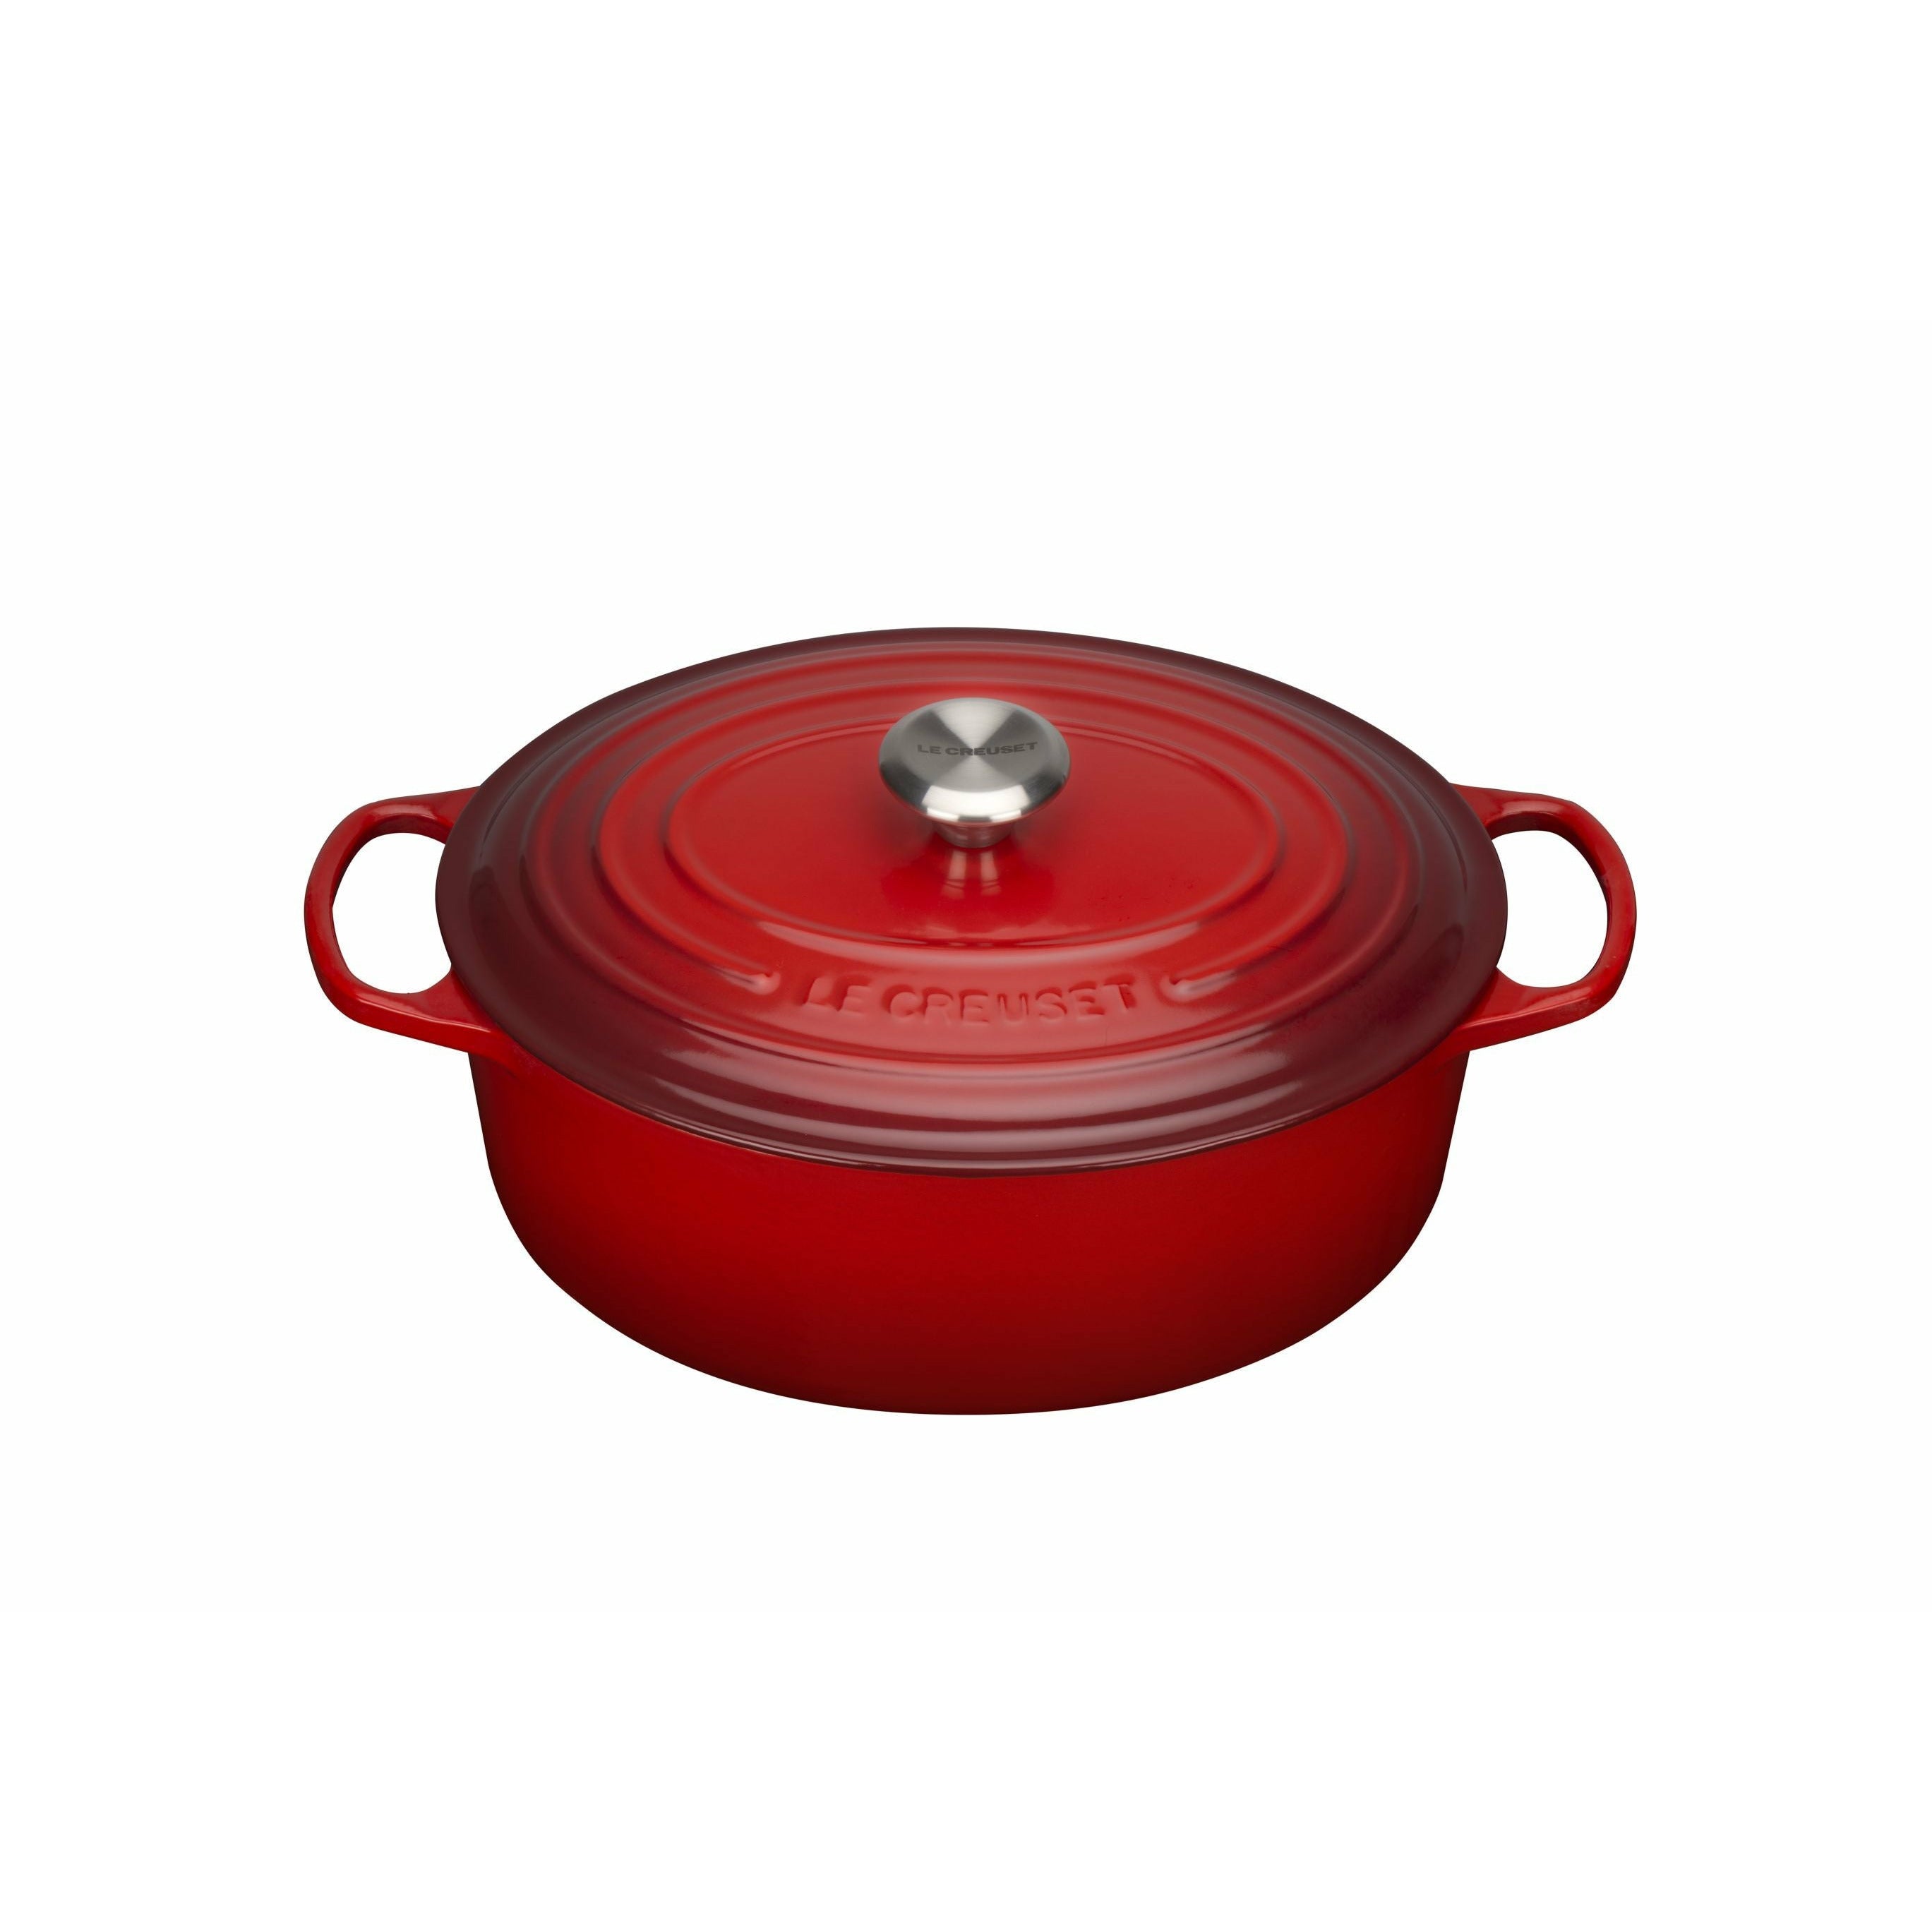 Le Creuset Signature Oval Roaster 31 cm, Cherry Red